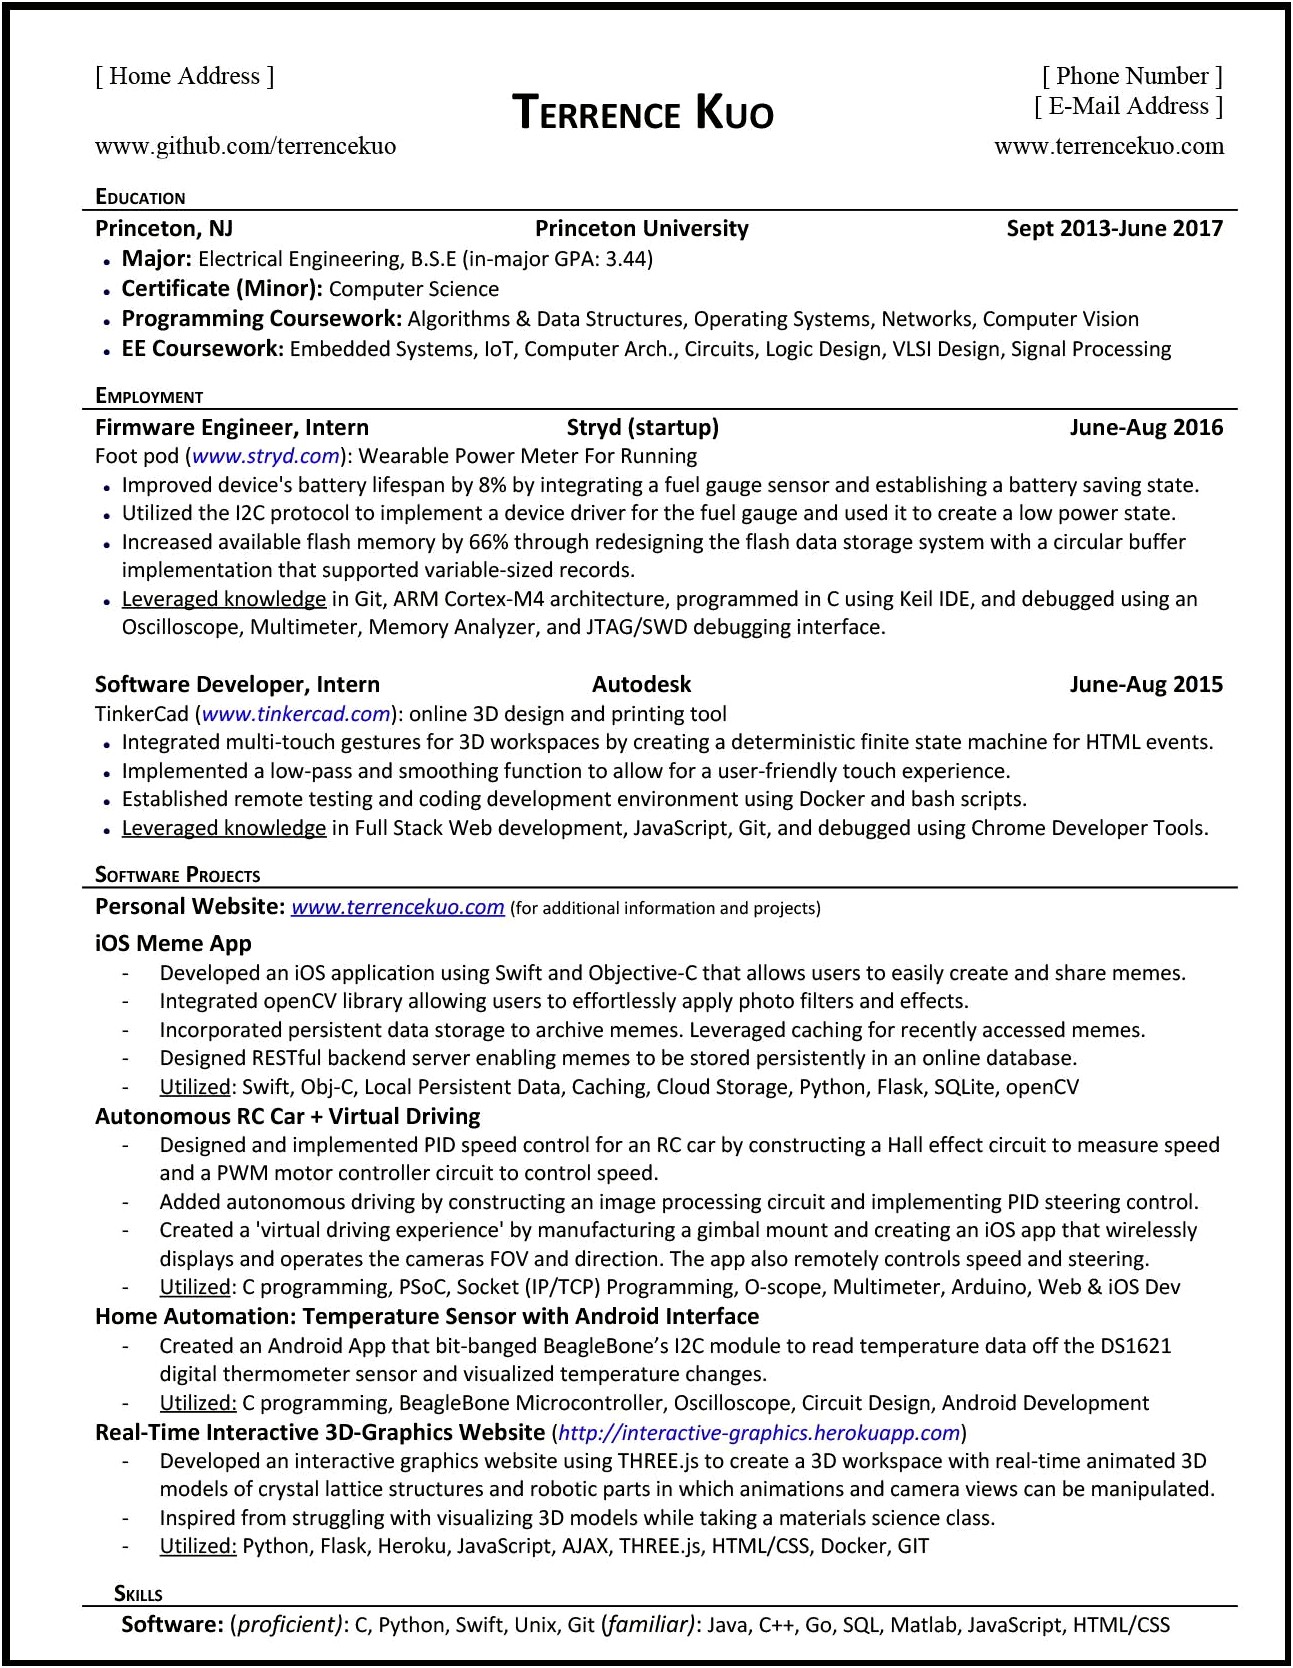 Sample Resume With Degree And Skills